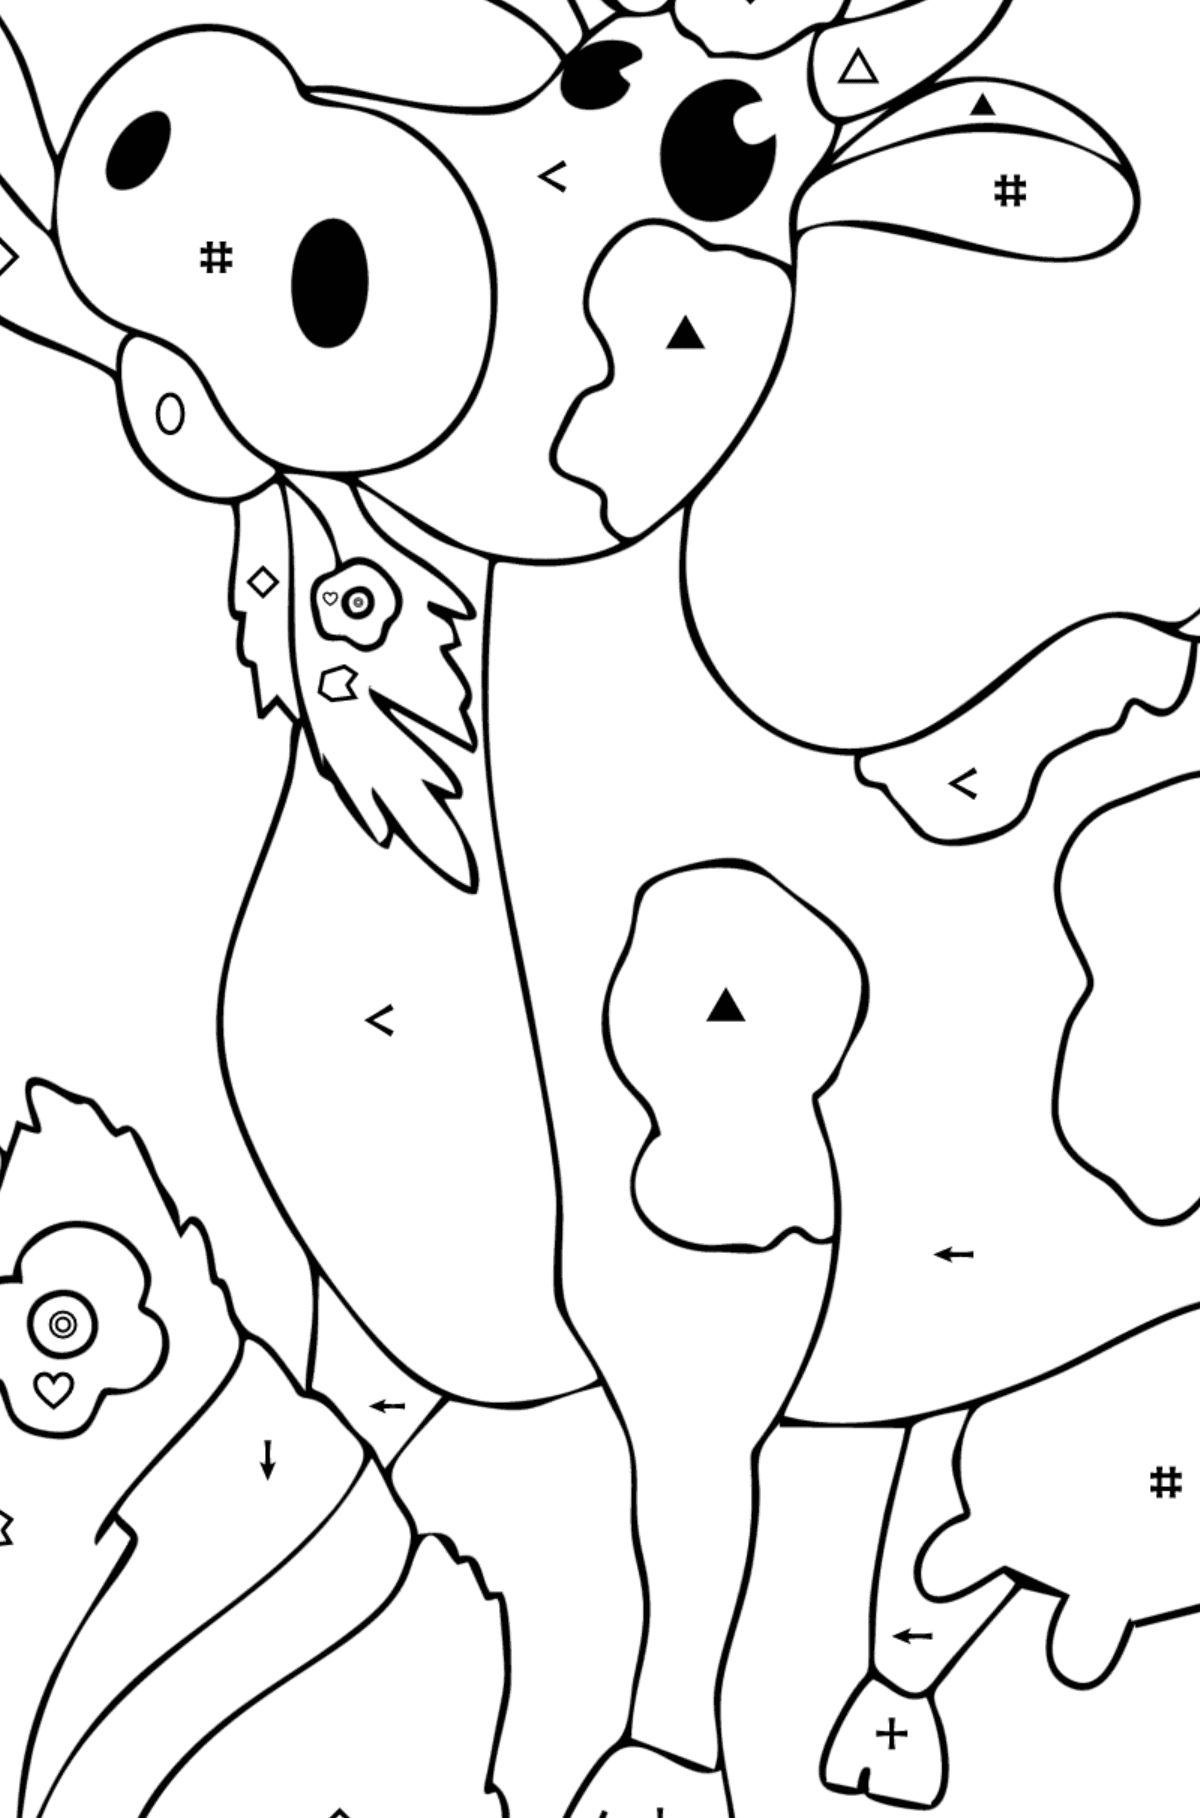 Coloring page Cow with hay - Coloring by Symbols and Geometric Shapes for Kids